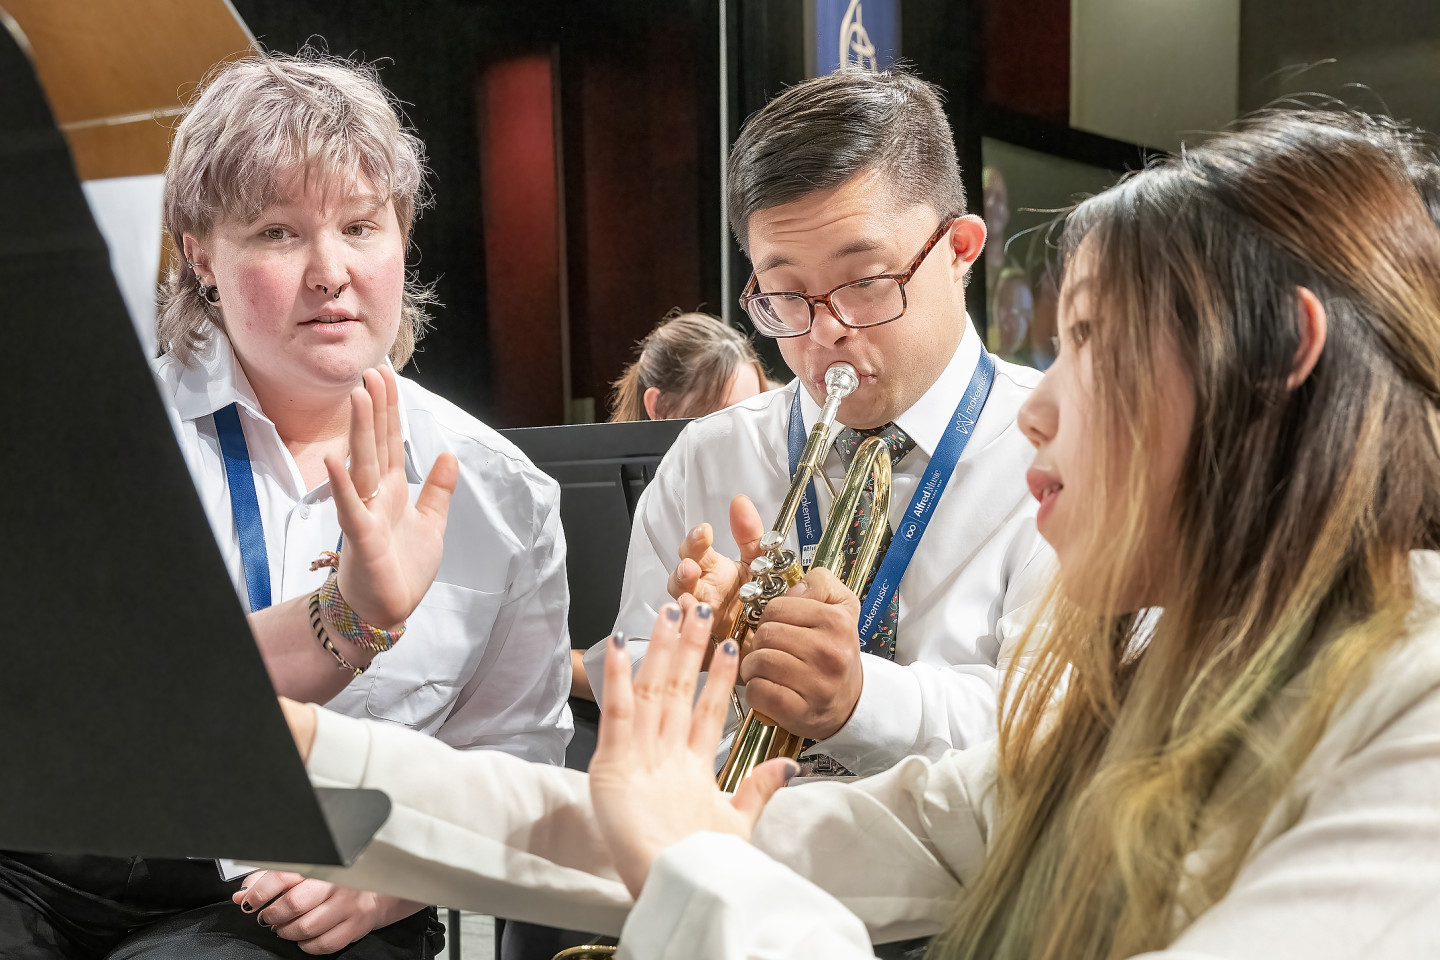 A musician plays a trumpet while two students hold up their hands to count measures.